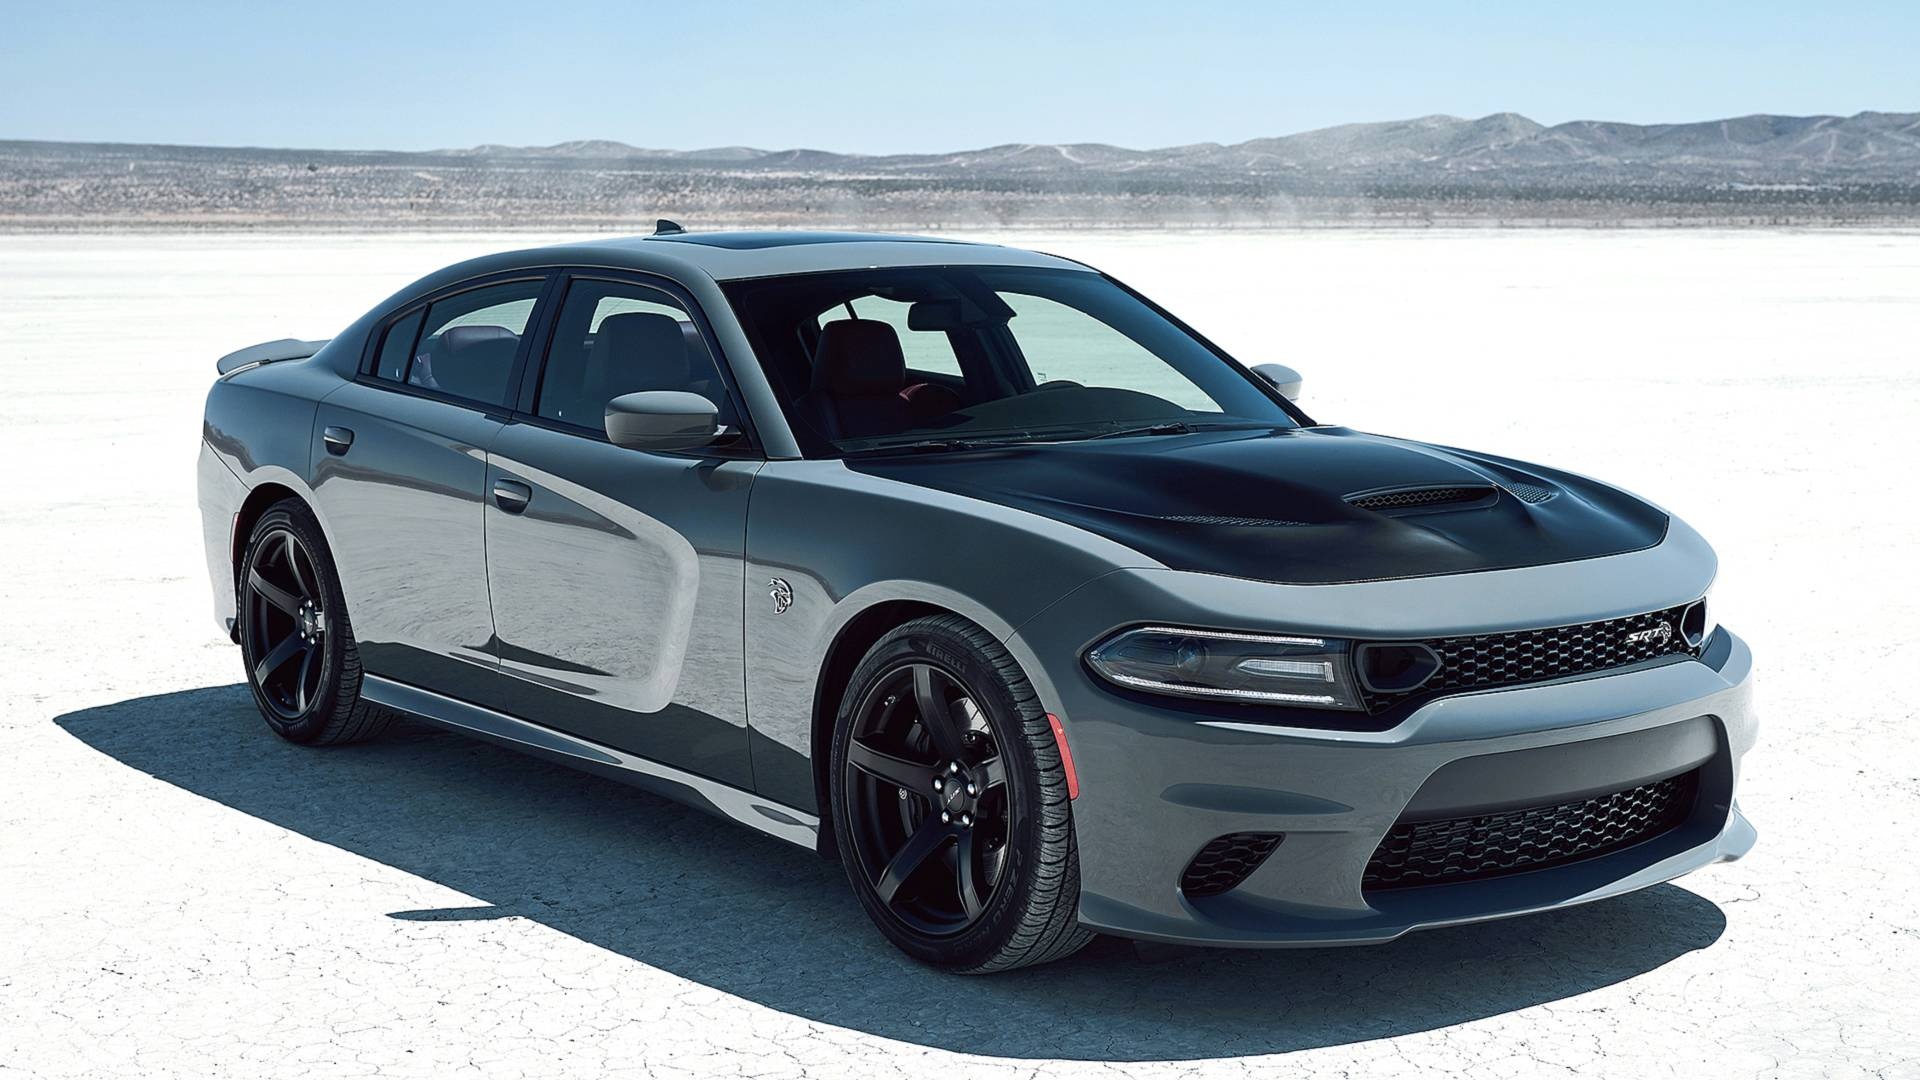 Dodge Charger, New variants, Custom options, More features, 1920x1080 Full HD Desktop